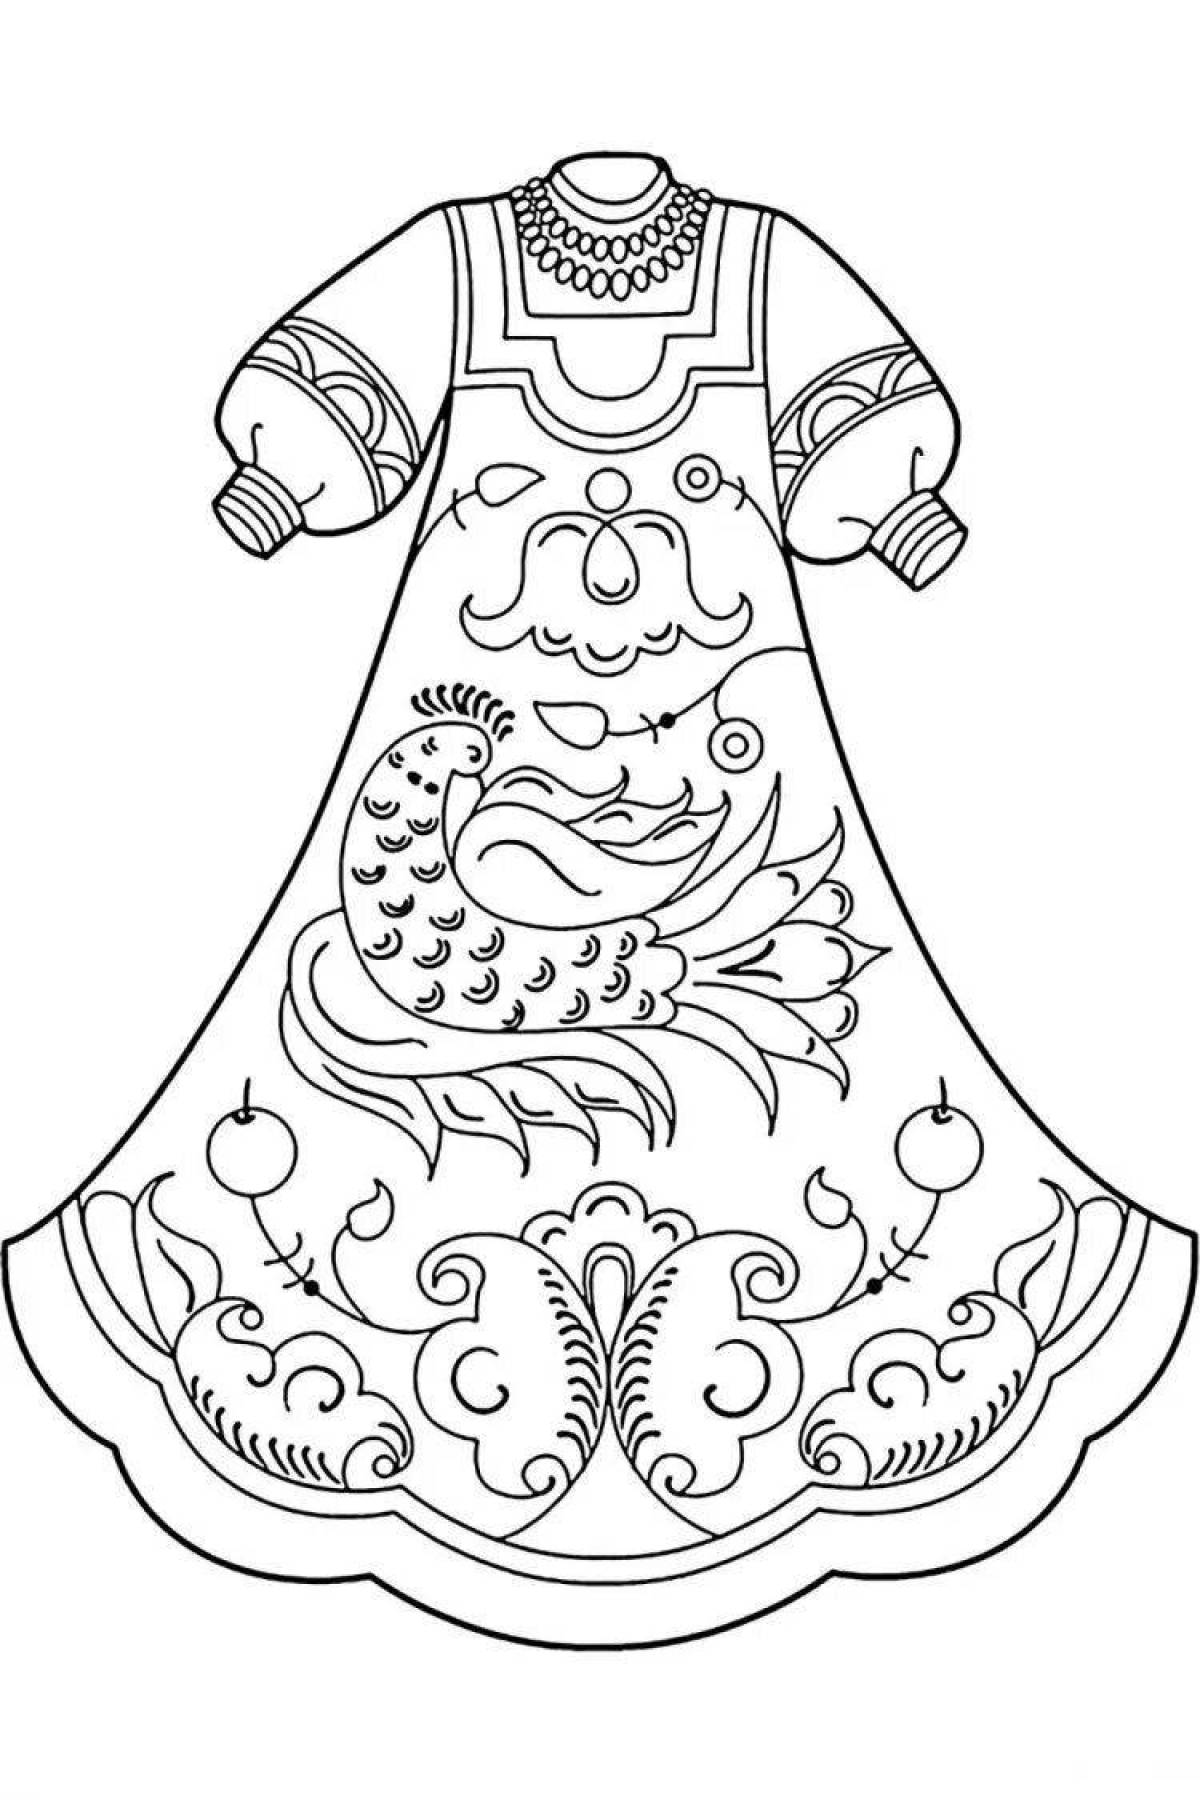 Colouring awesome Russian sundress